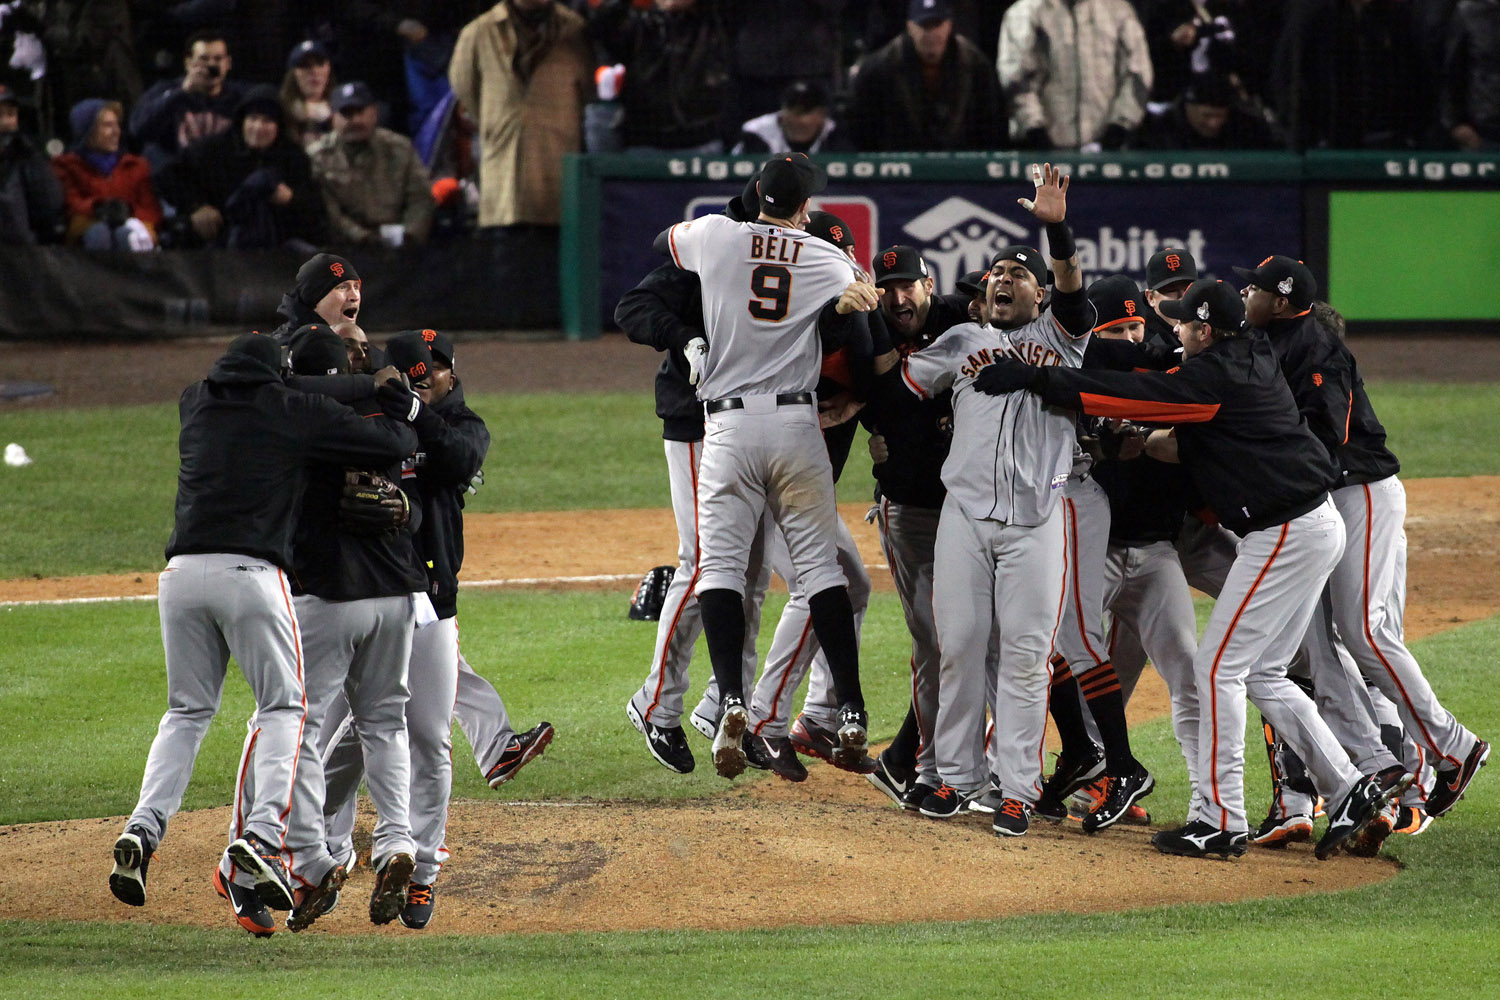 Image: Oct. 28, 2012. The San Francisco Giants celebrate after striking out the Detroit Tigers' Miguel Cabrera in the 10th inning to win Game 4 and the 2012 World Series at Comerica Park in Detroit.